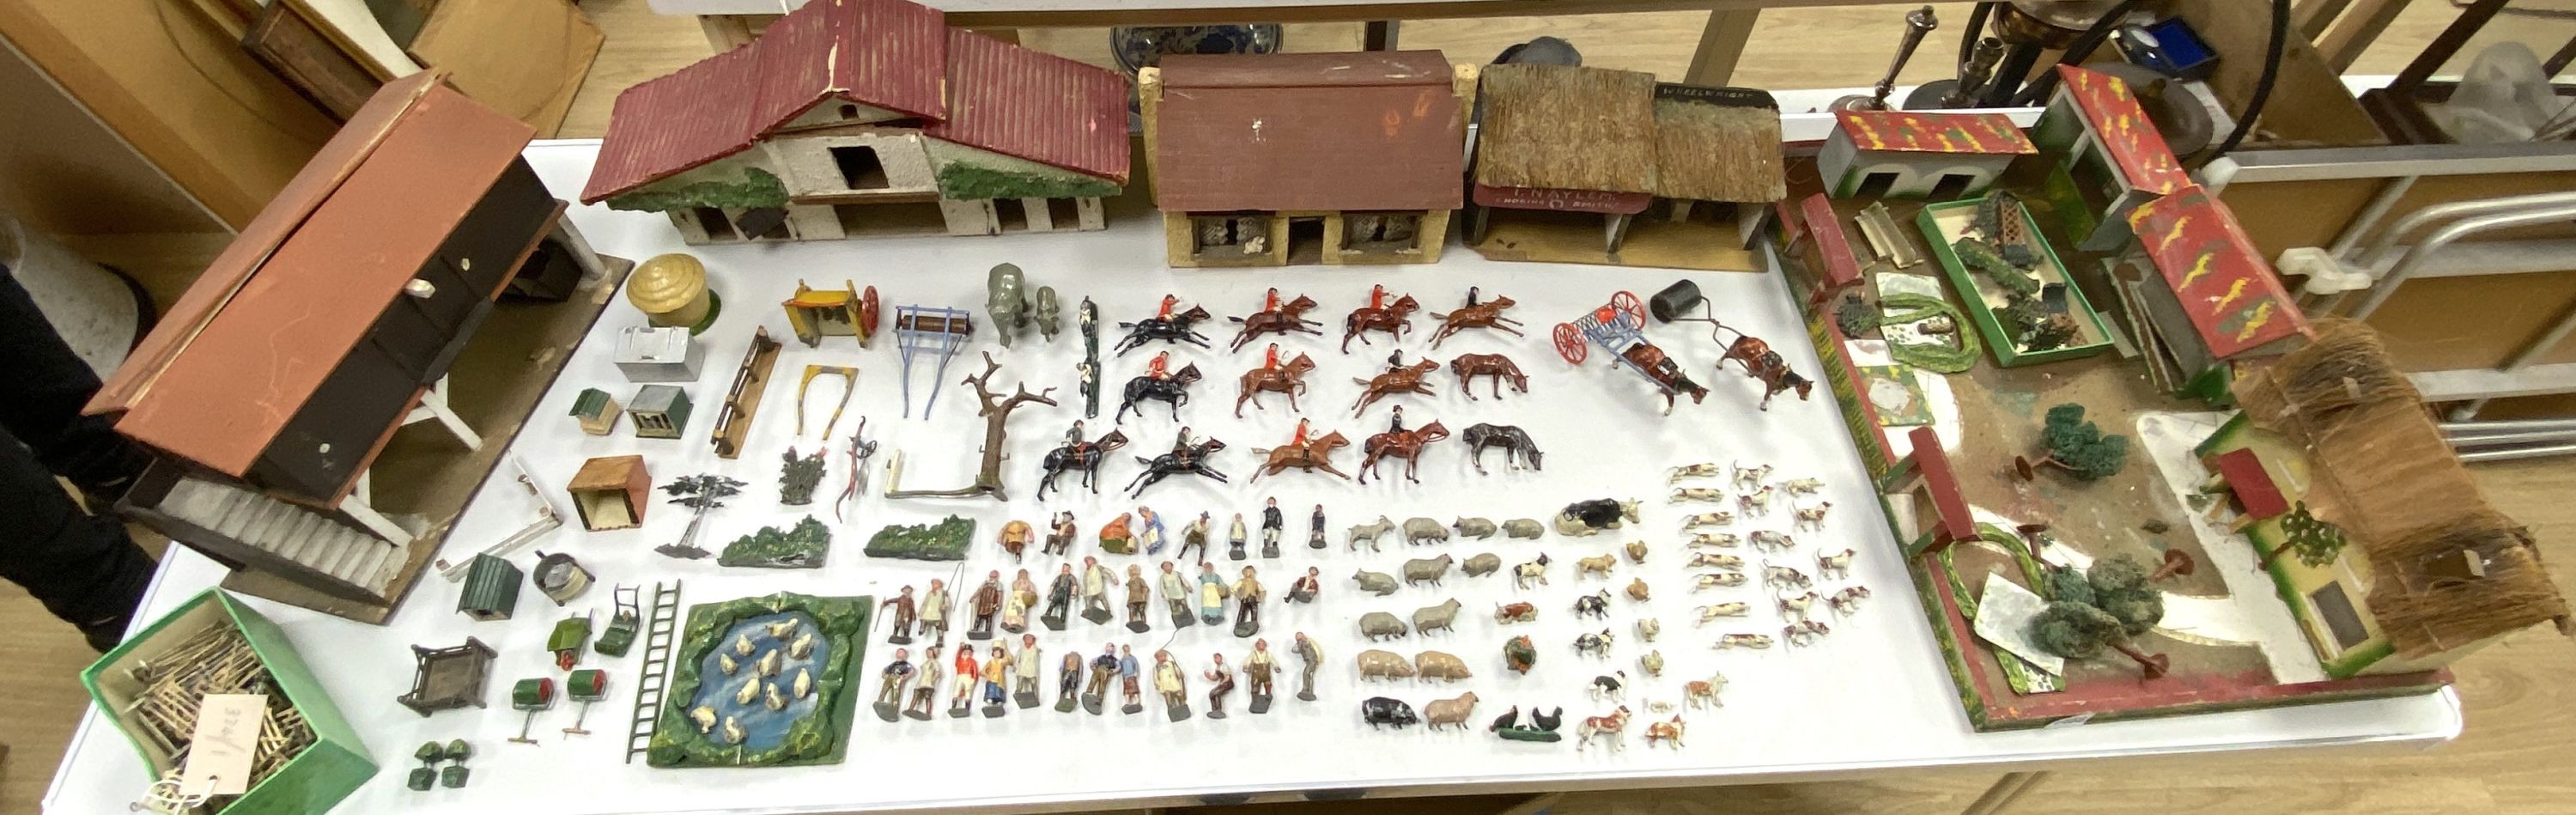 A collection of mainly Britains painted lead figures and animals, including huntsmen and hounds, farm workers, animals and wooden buildings